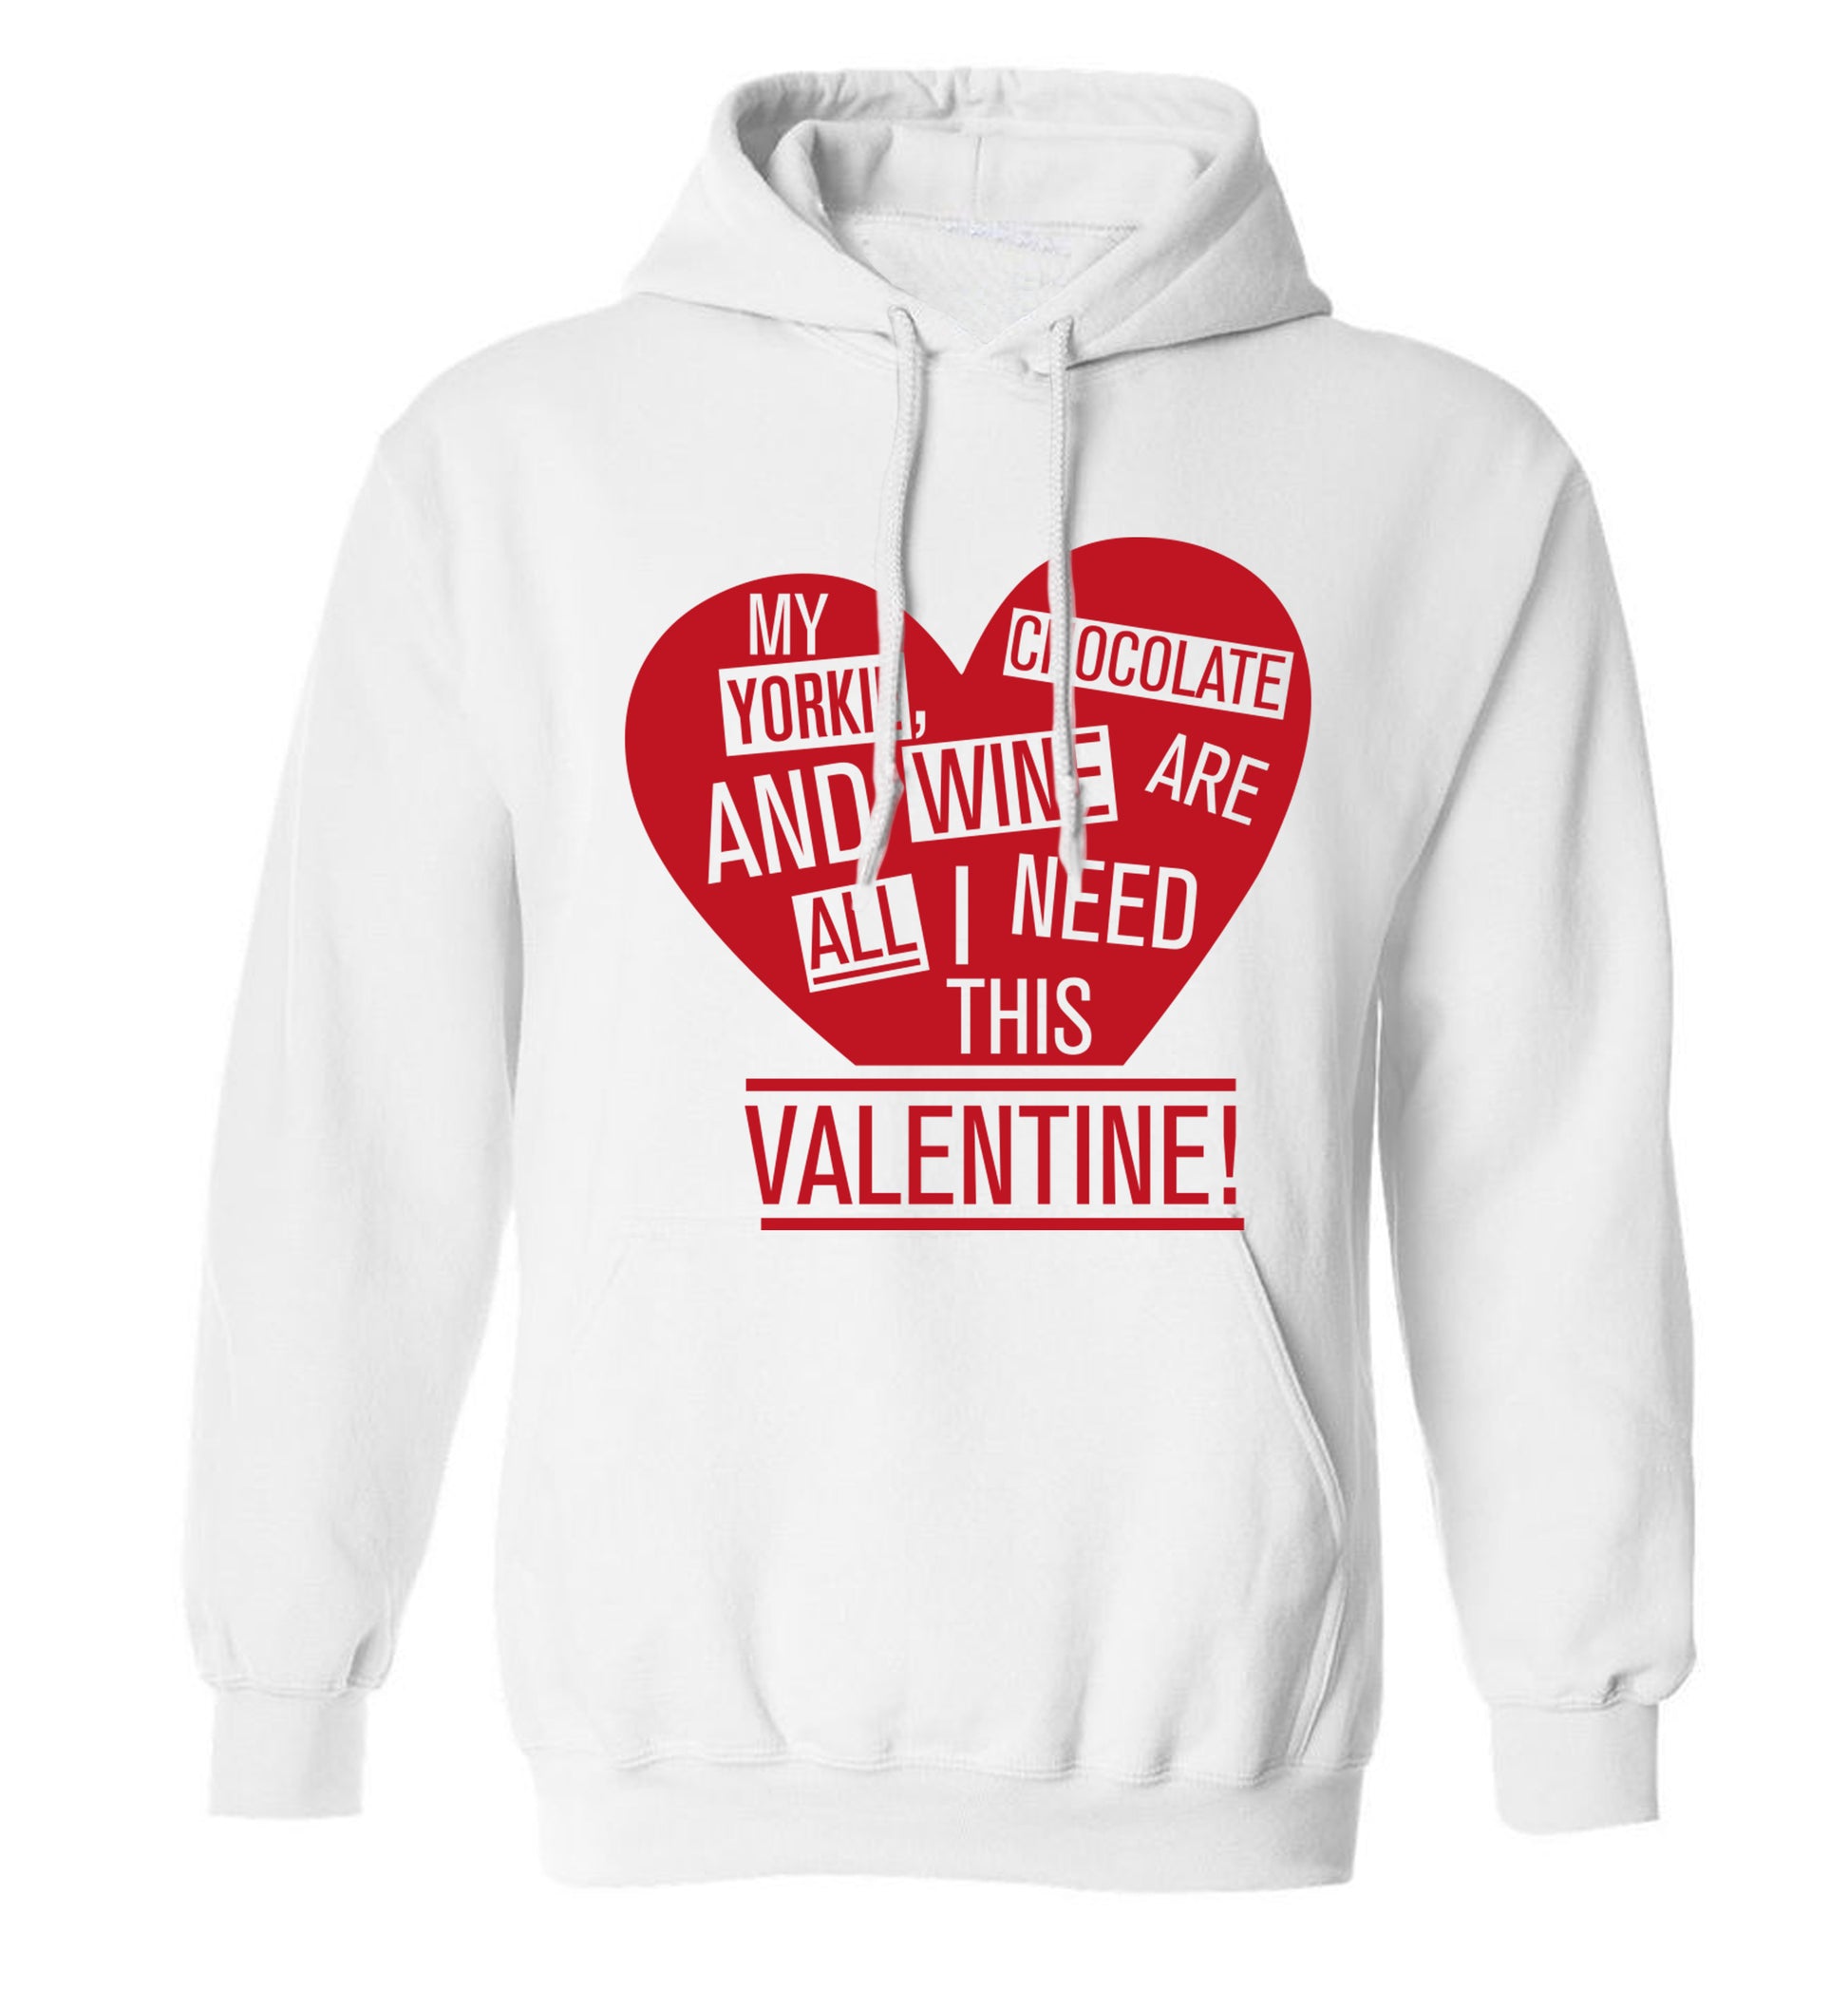 My yorkie, chocolate and wine are all I need this valentine! adults unisex white hoodie 2XL